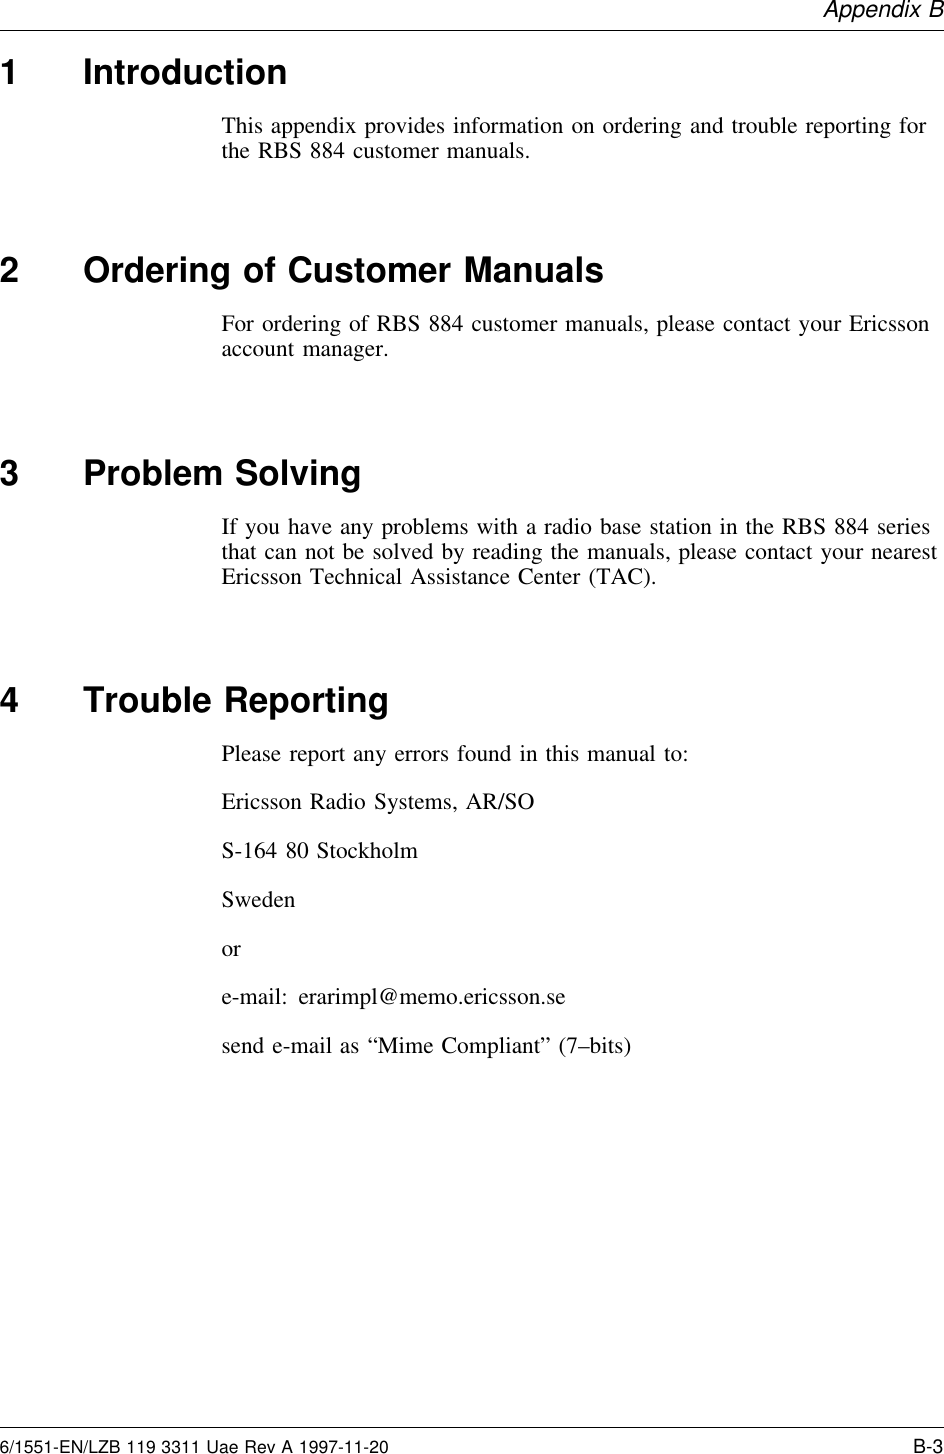 Appendix B1 IntroductionThis appendix provides information on ordering and trouble reporting forthe RBS 884 customer manuals.2 Ordering of Customer ManualsFor ordering of RBS 884 customer manuals, please contact your Ericssonaccount manager.3 Problem SolvingIf you have any problems with a radio base station in the RBS 884 seriesthat can not be solved by reading the manuals, please contact your nearestEricsson Technical Assistance Center (TAC).4 Trouble ReportingPlease report any errors found in this manual to:Ericsson Radio Systems, AR/SOS-164 80 StockholmSwedenore-mail: erarimpl@memo.ericsson.sesend e-mail as “Mime Compliant” (7–bits)6/1551-EN/LZB 119 3311 Uae Rev A 1997-11-20 B-3